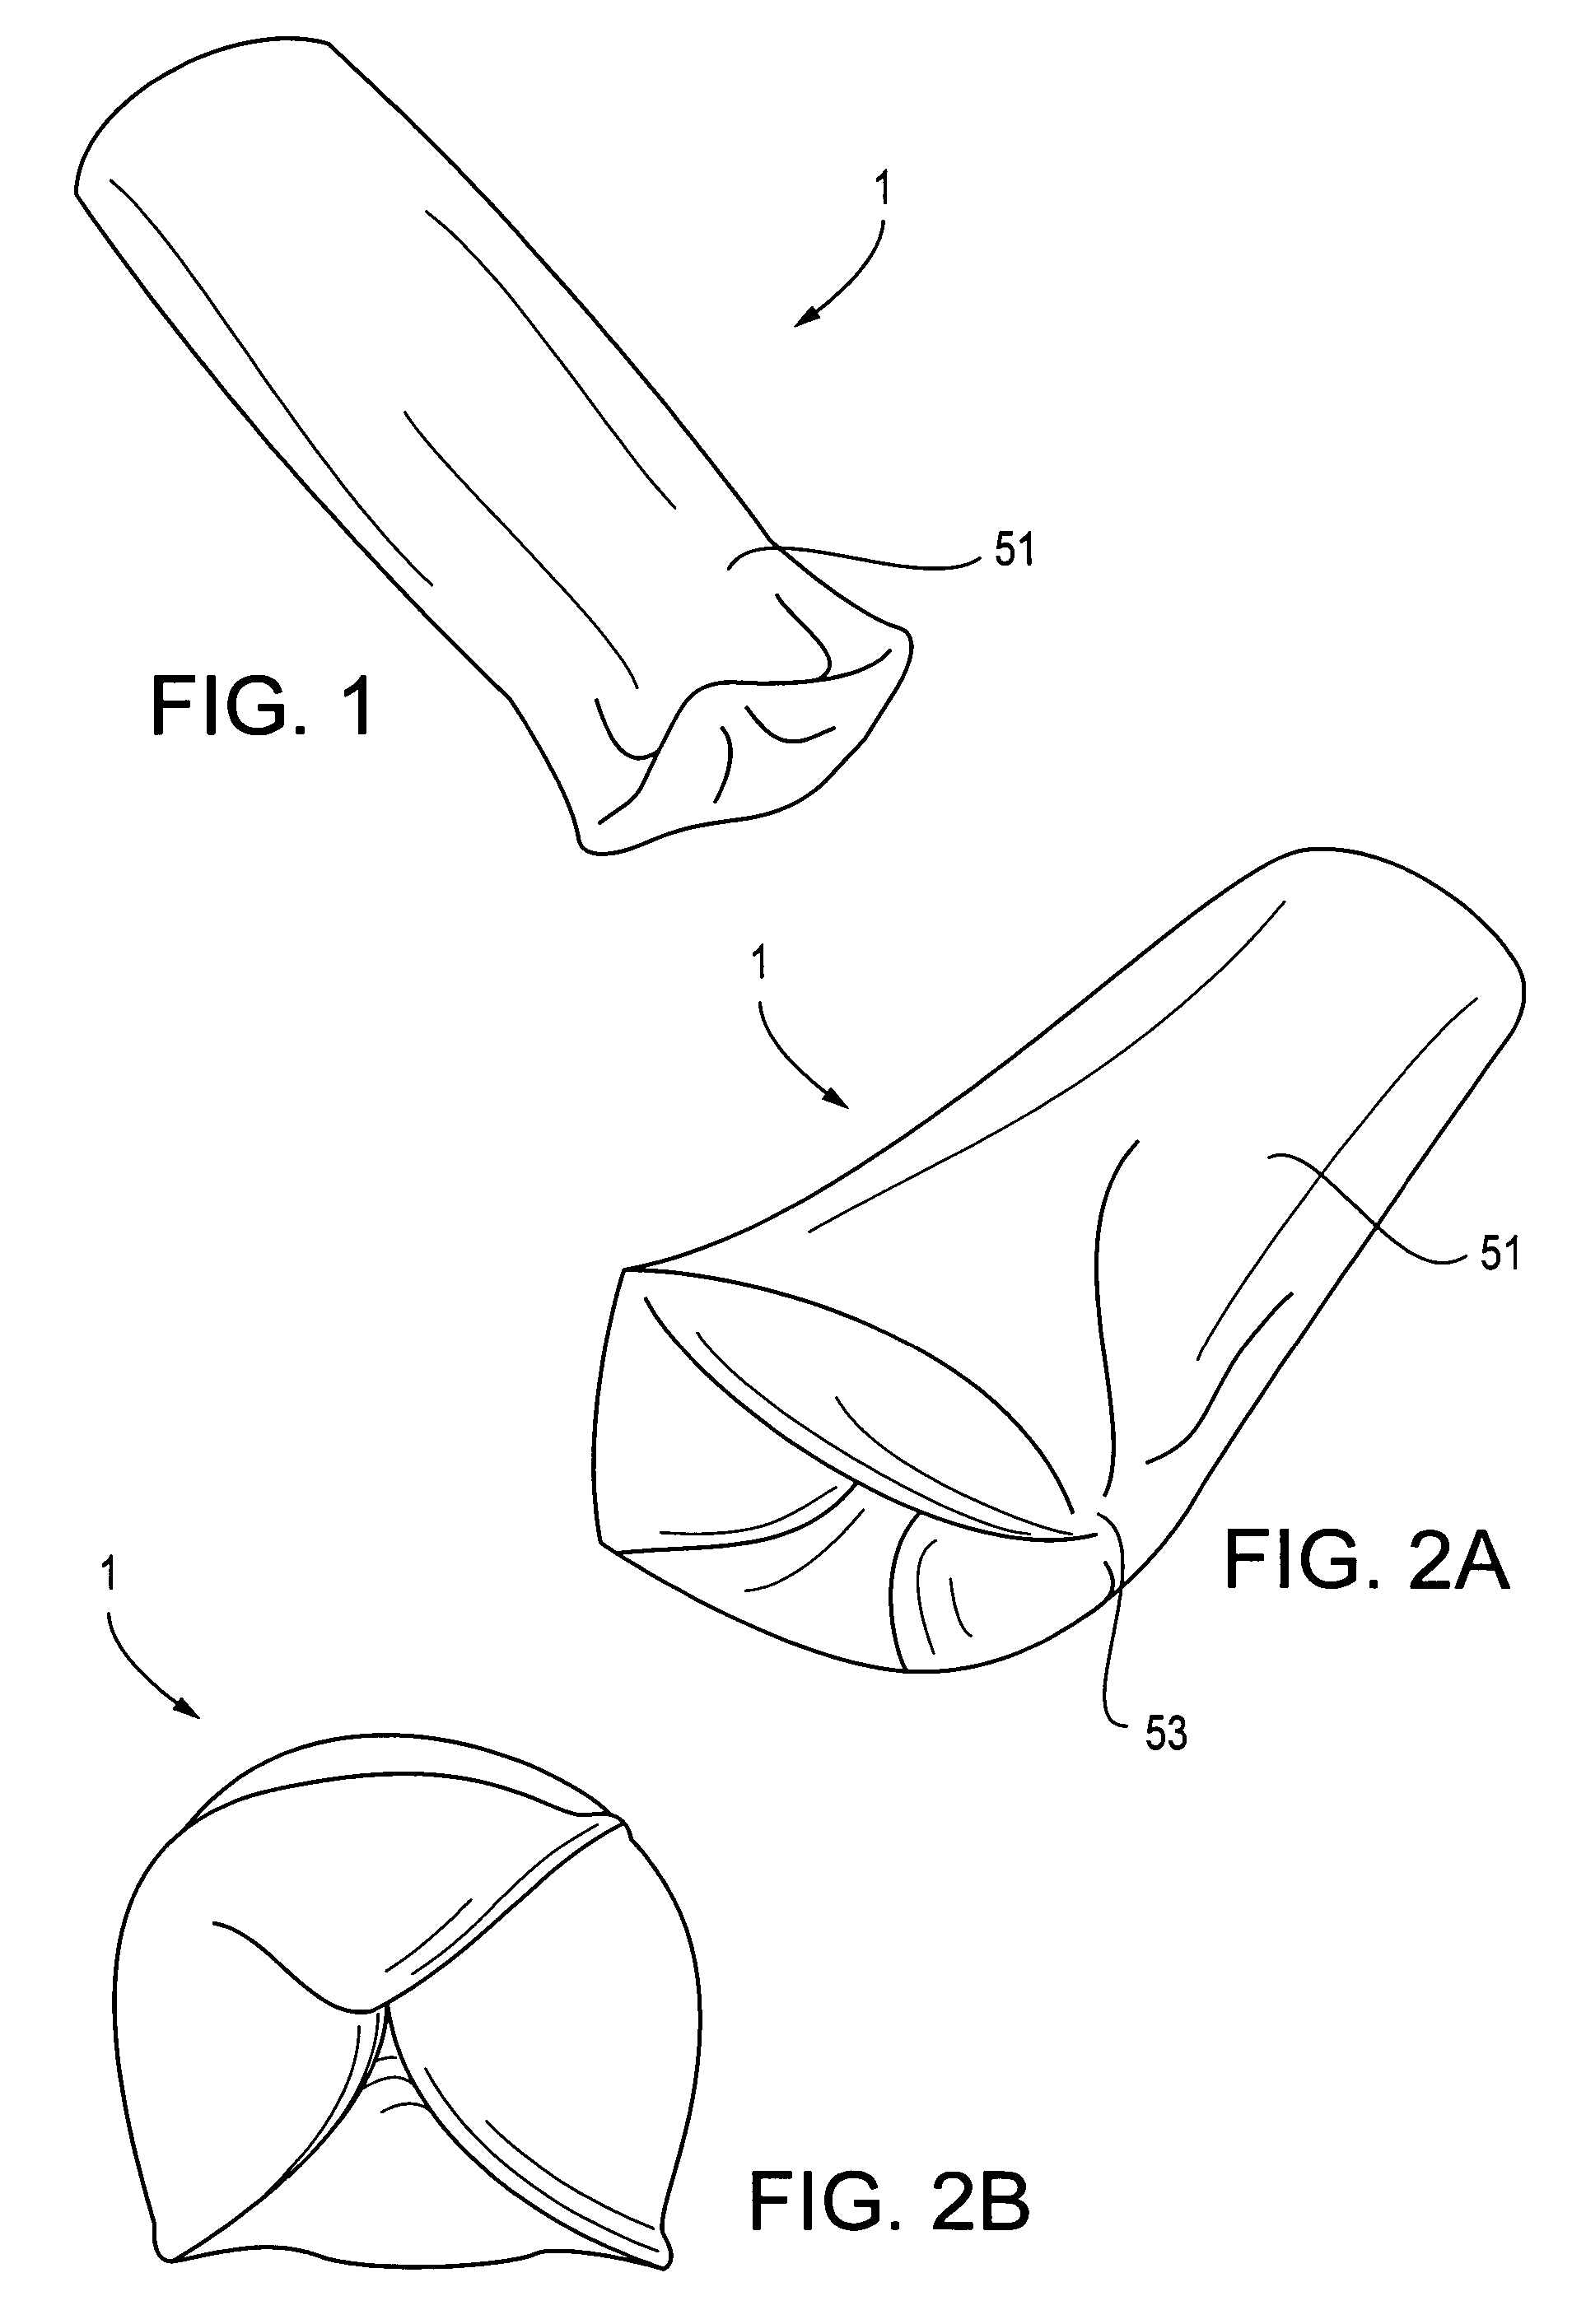 Method and system for minimizing leakage of a distending medium during endoscopic procedures